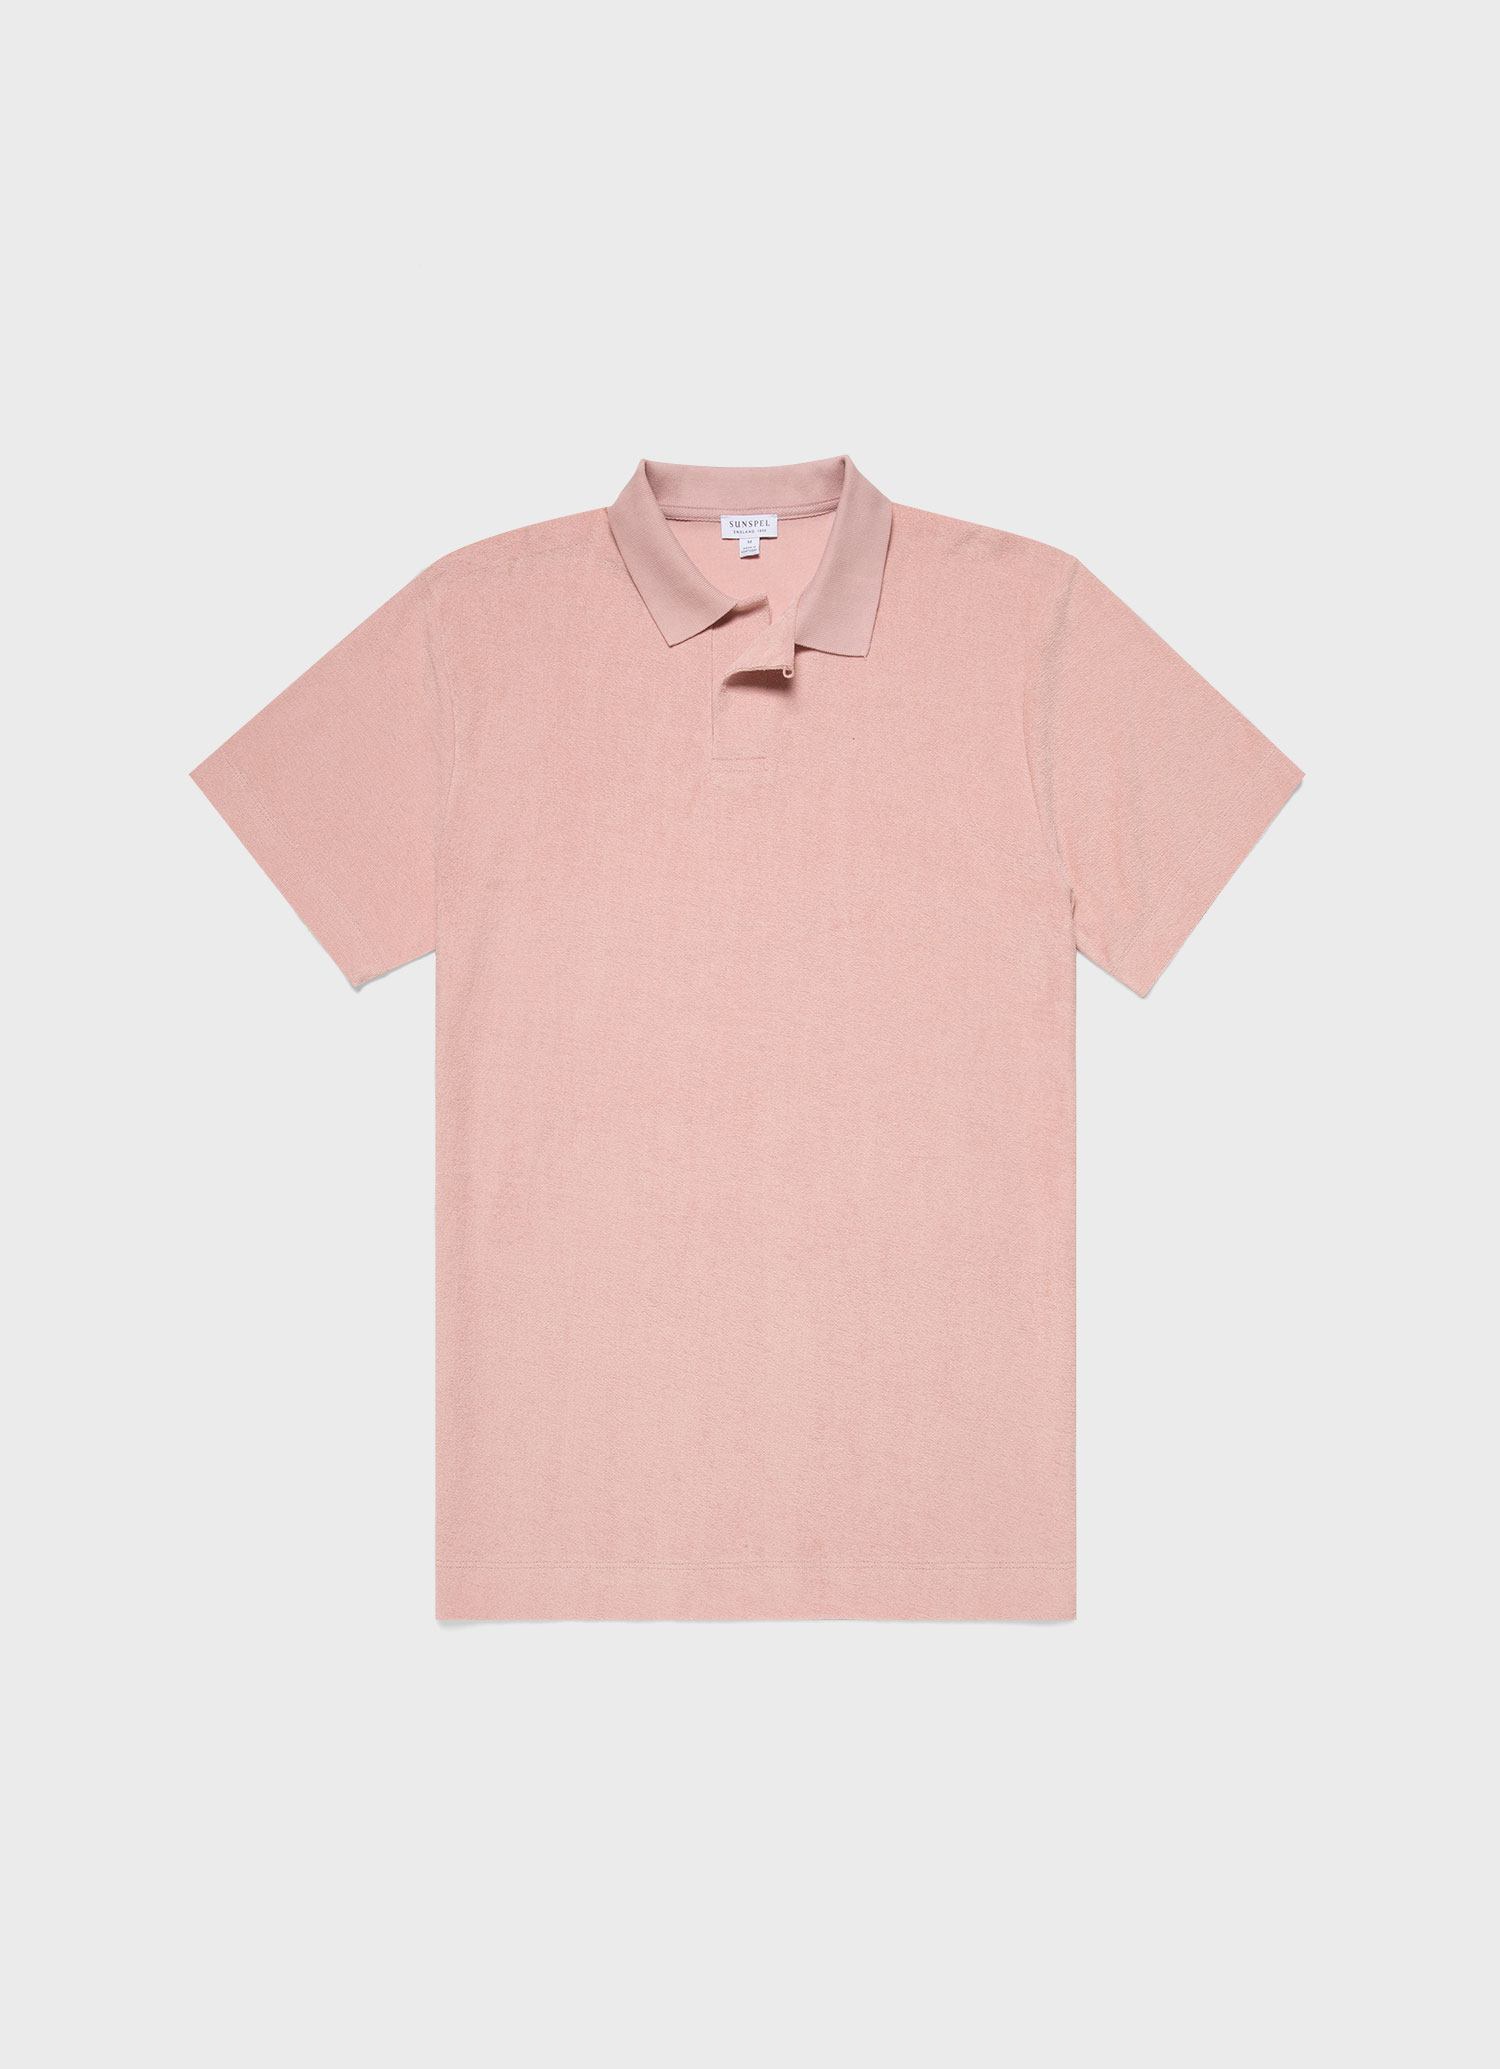 Men's Towelling Polo Shirt in Shell Pink